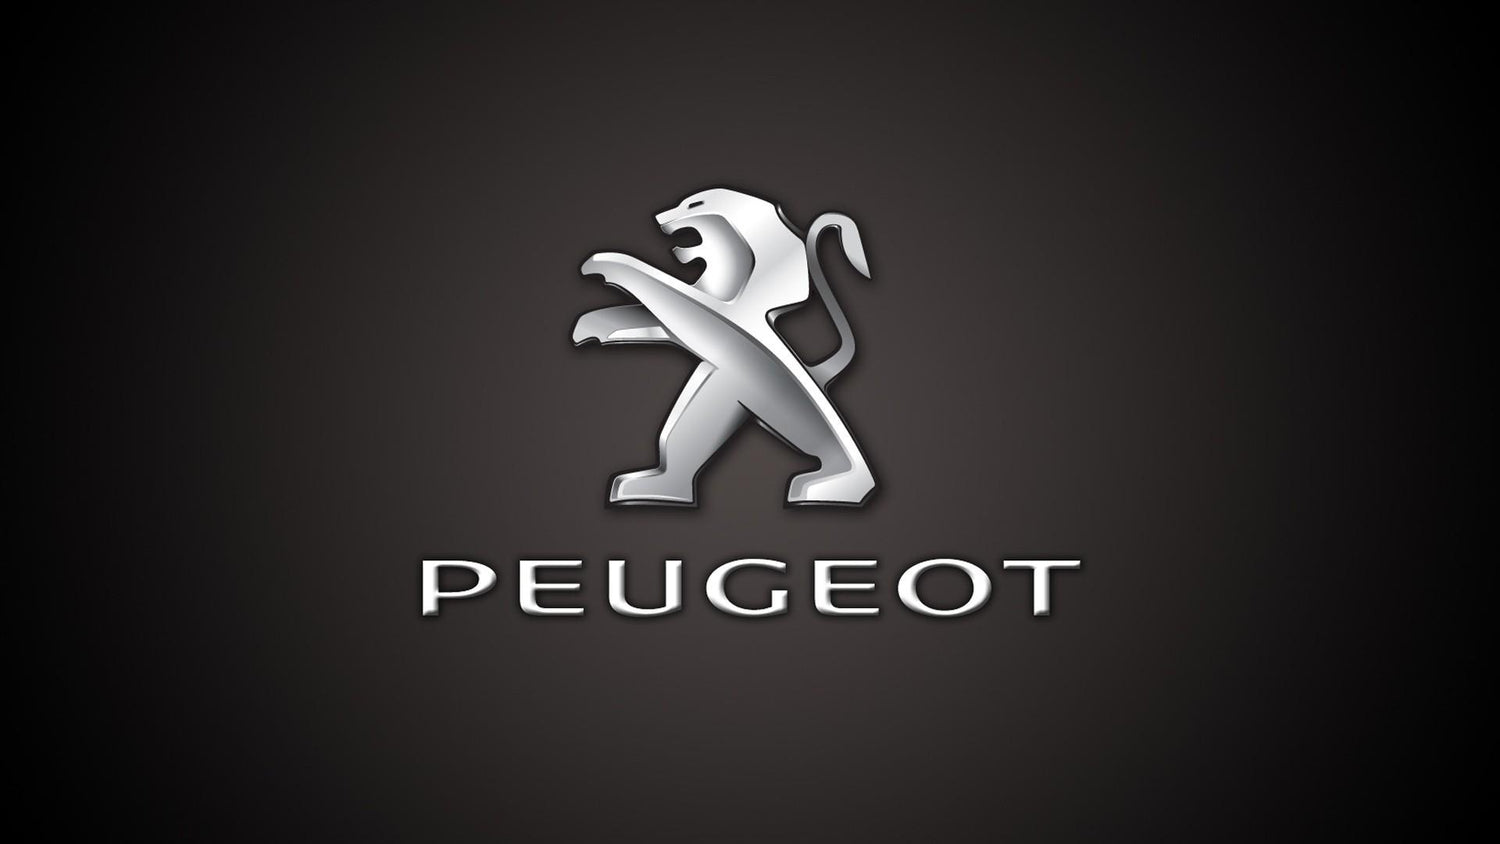 Peugeot | Electric Car Charger EV Cables for Peugeot type 1, type 2 and Portable Charging Cables